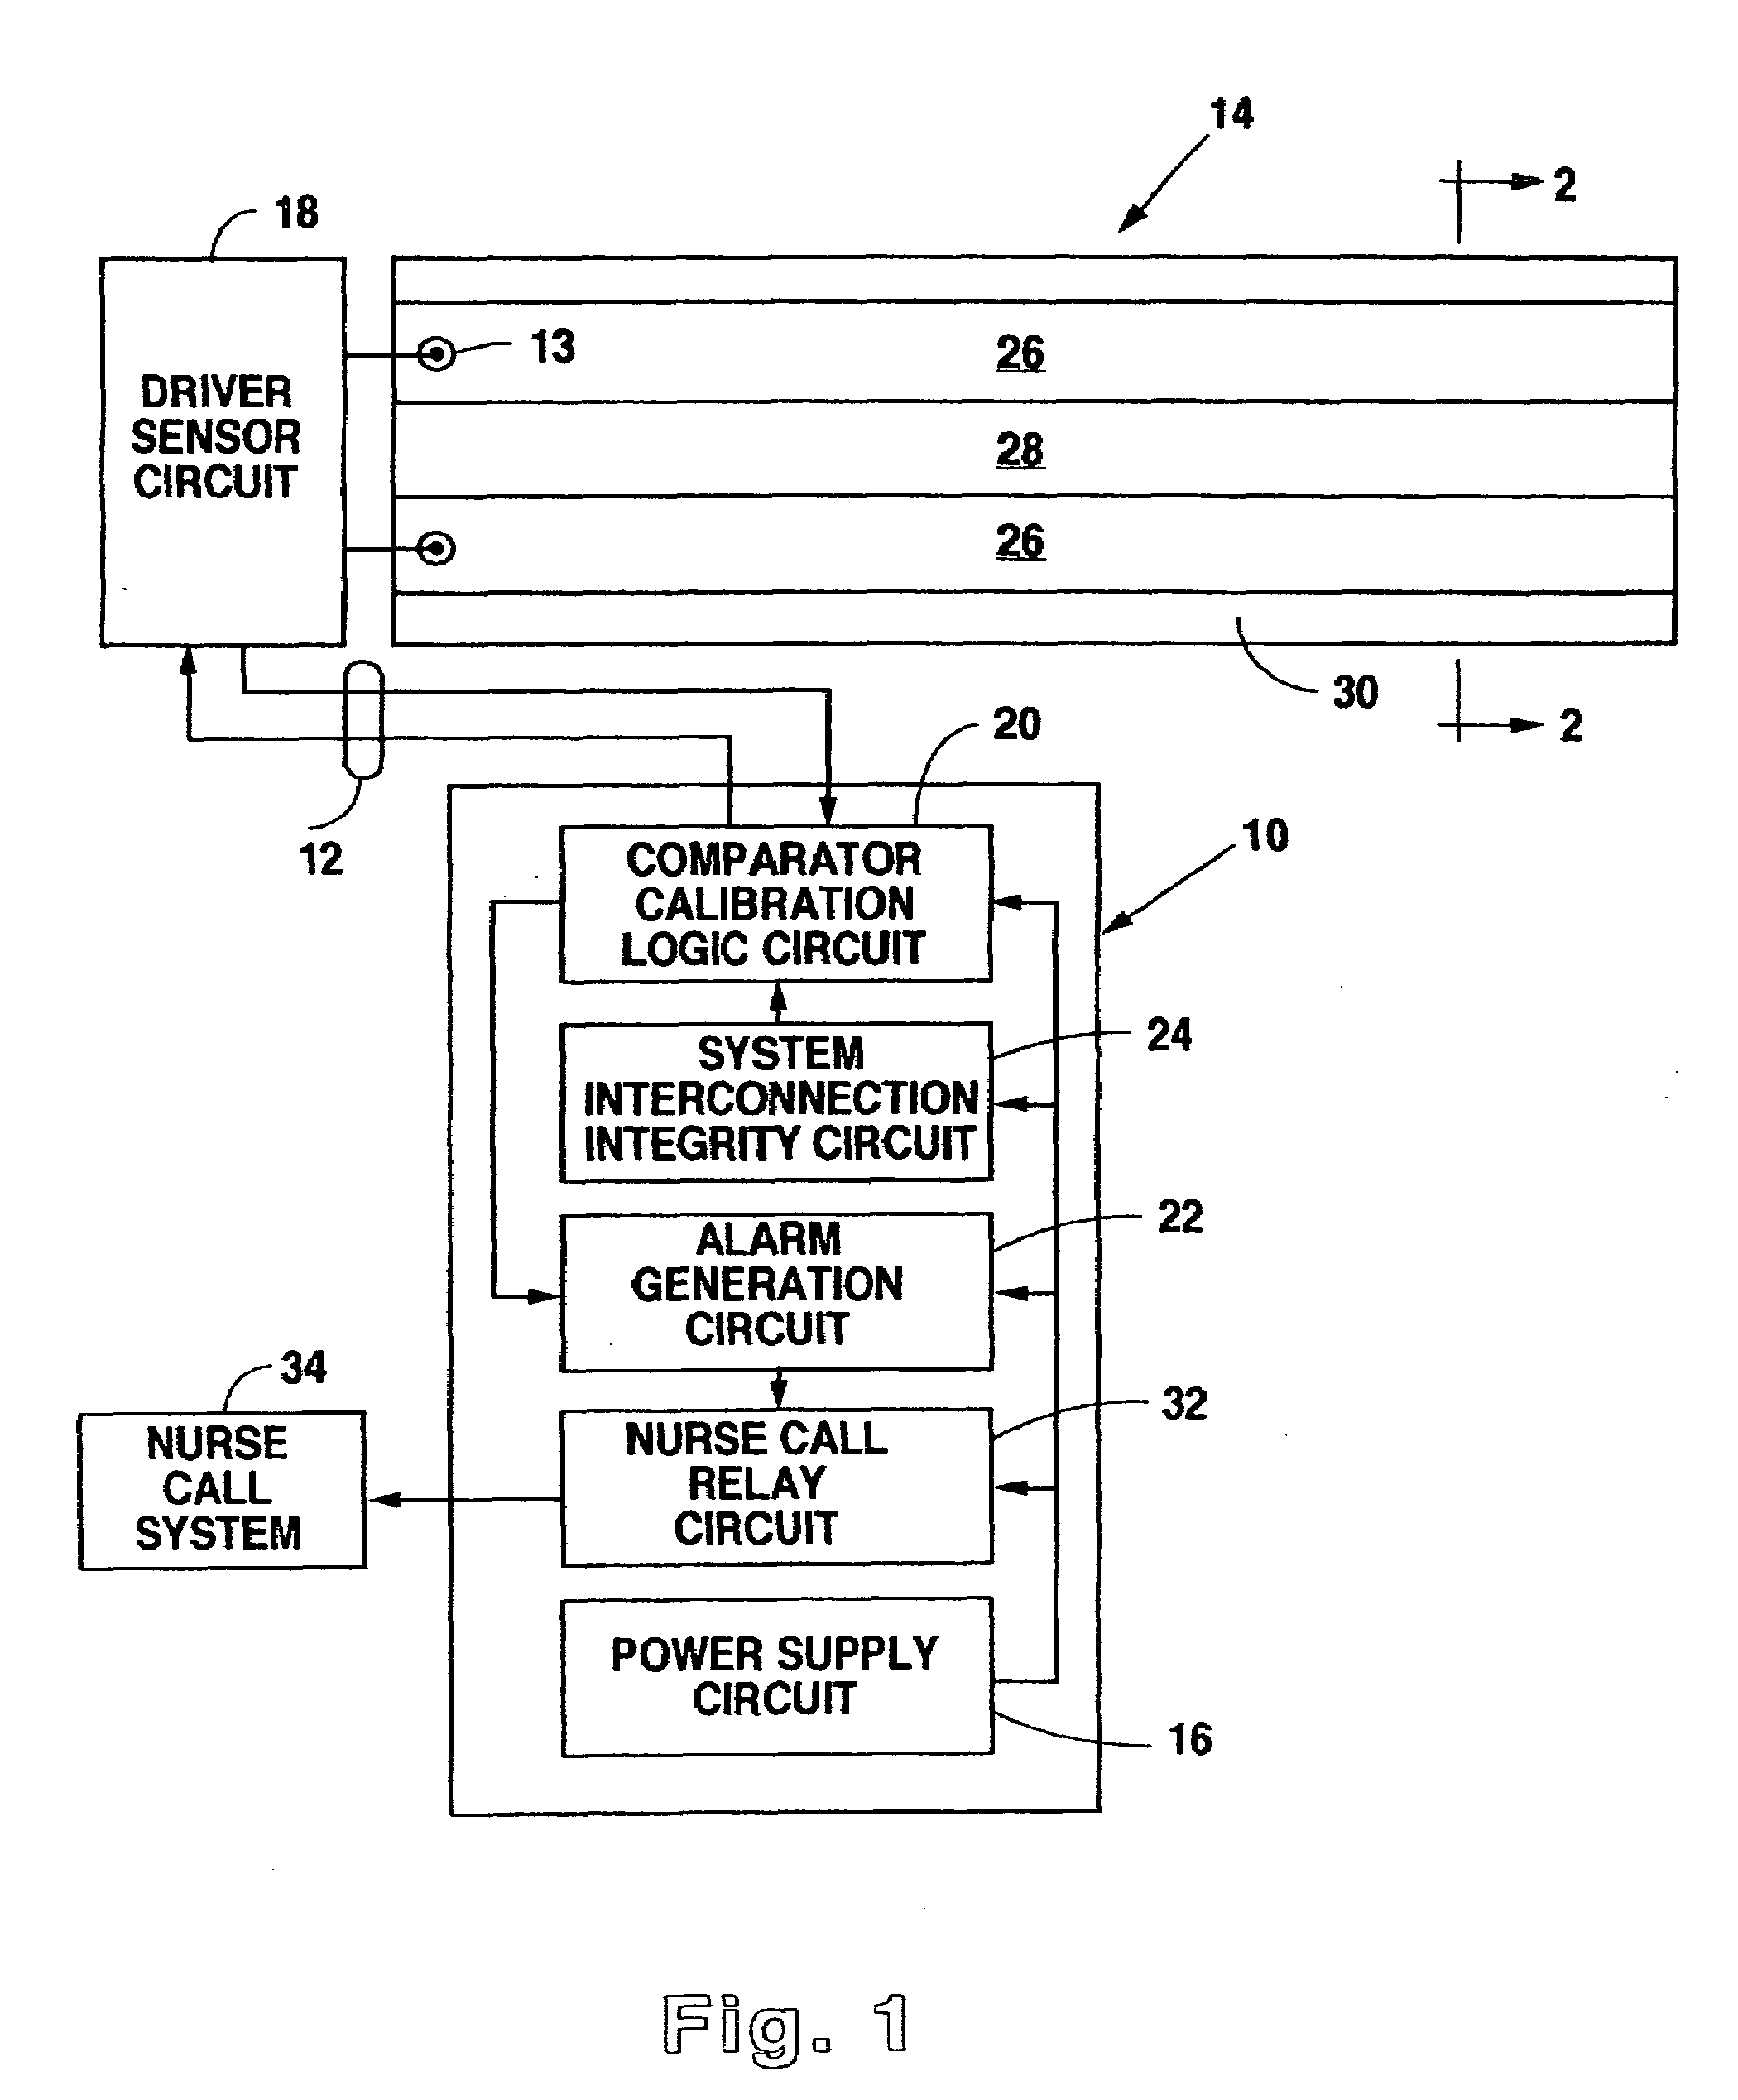 Modular Systems for Monitoring the Presence of a Person Using a Variety of Sensing Devices